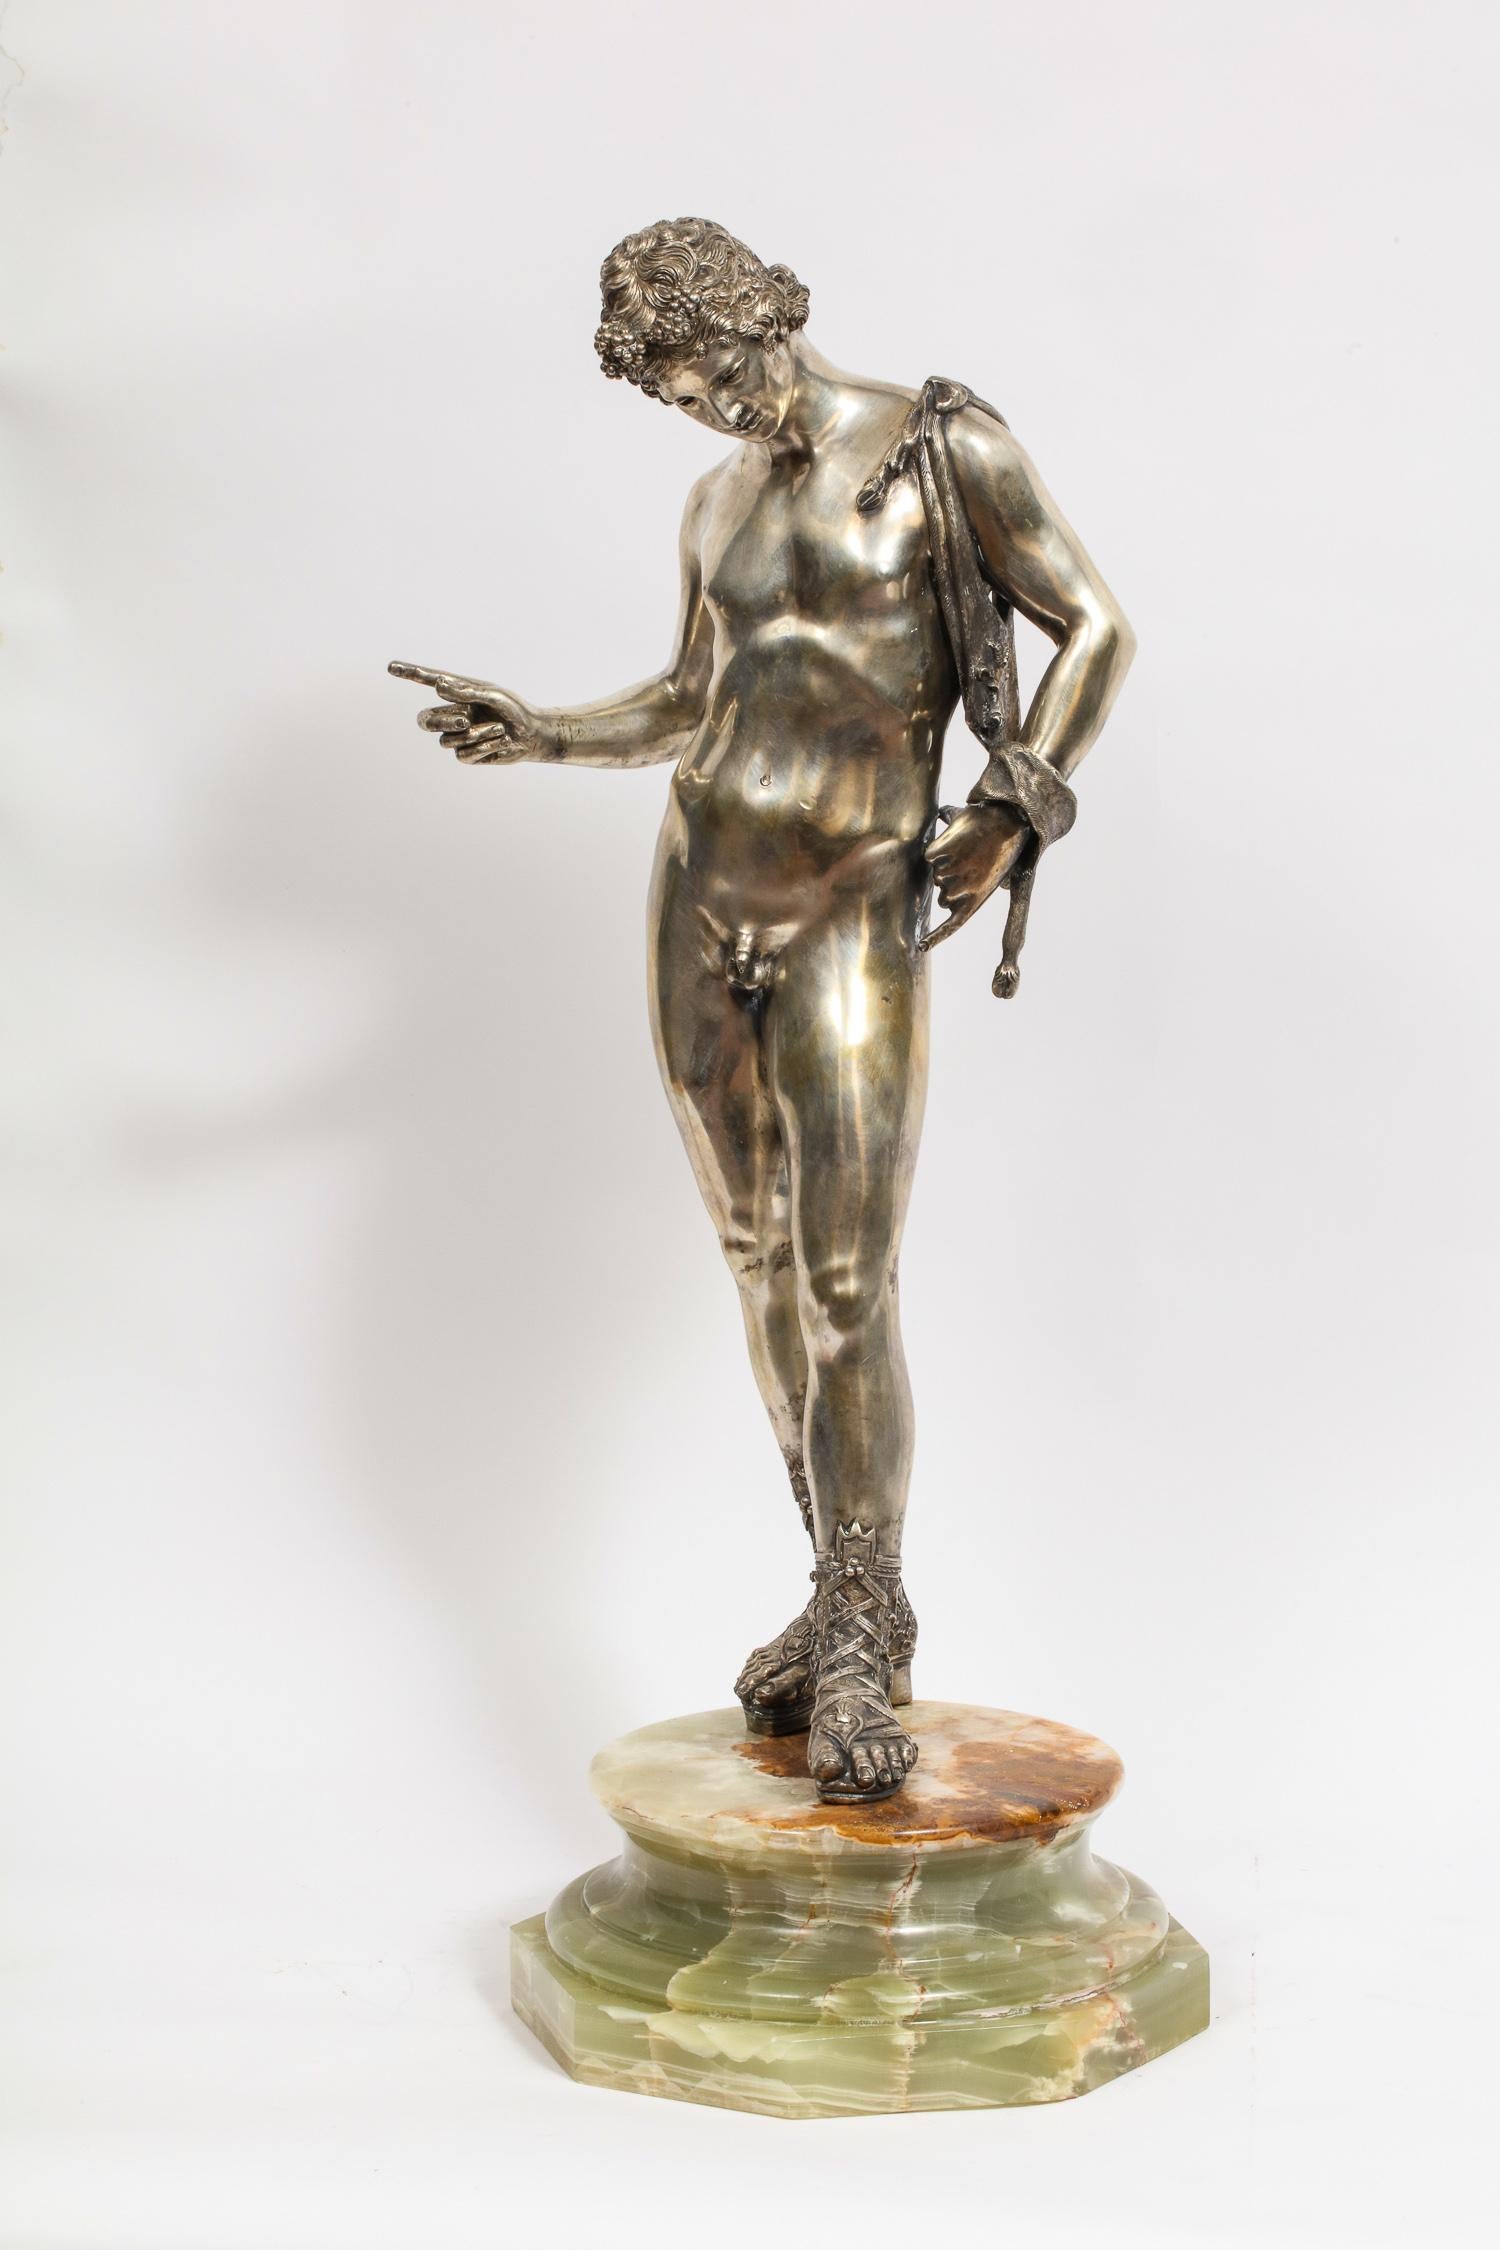 Large Italian silver figure / statue / sculpture of a male nude, Narcissus, after the antique,
early 20th century.

Depicting Narcissus with a goatskin over his shoulder, mounted on a green onyx pedestal, with national Italian mark to heel of